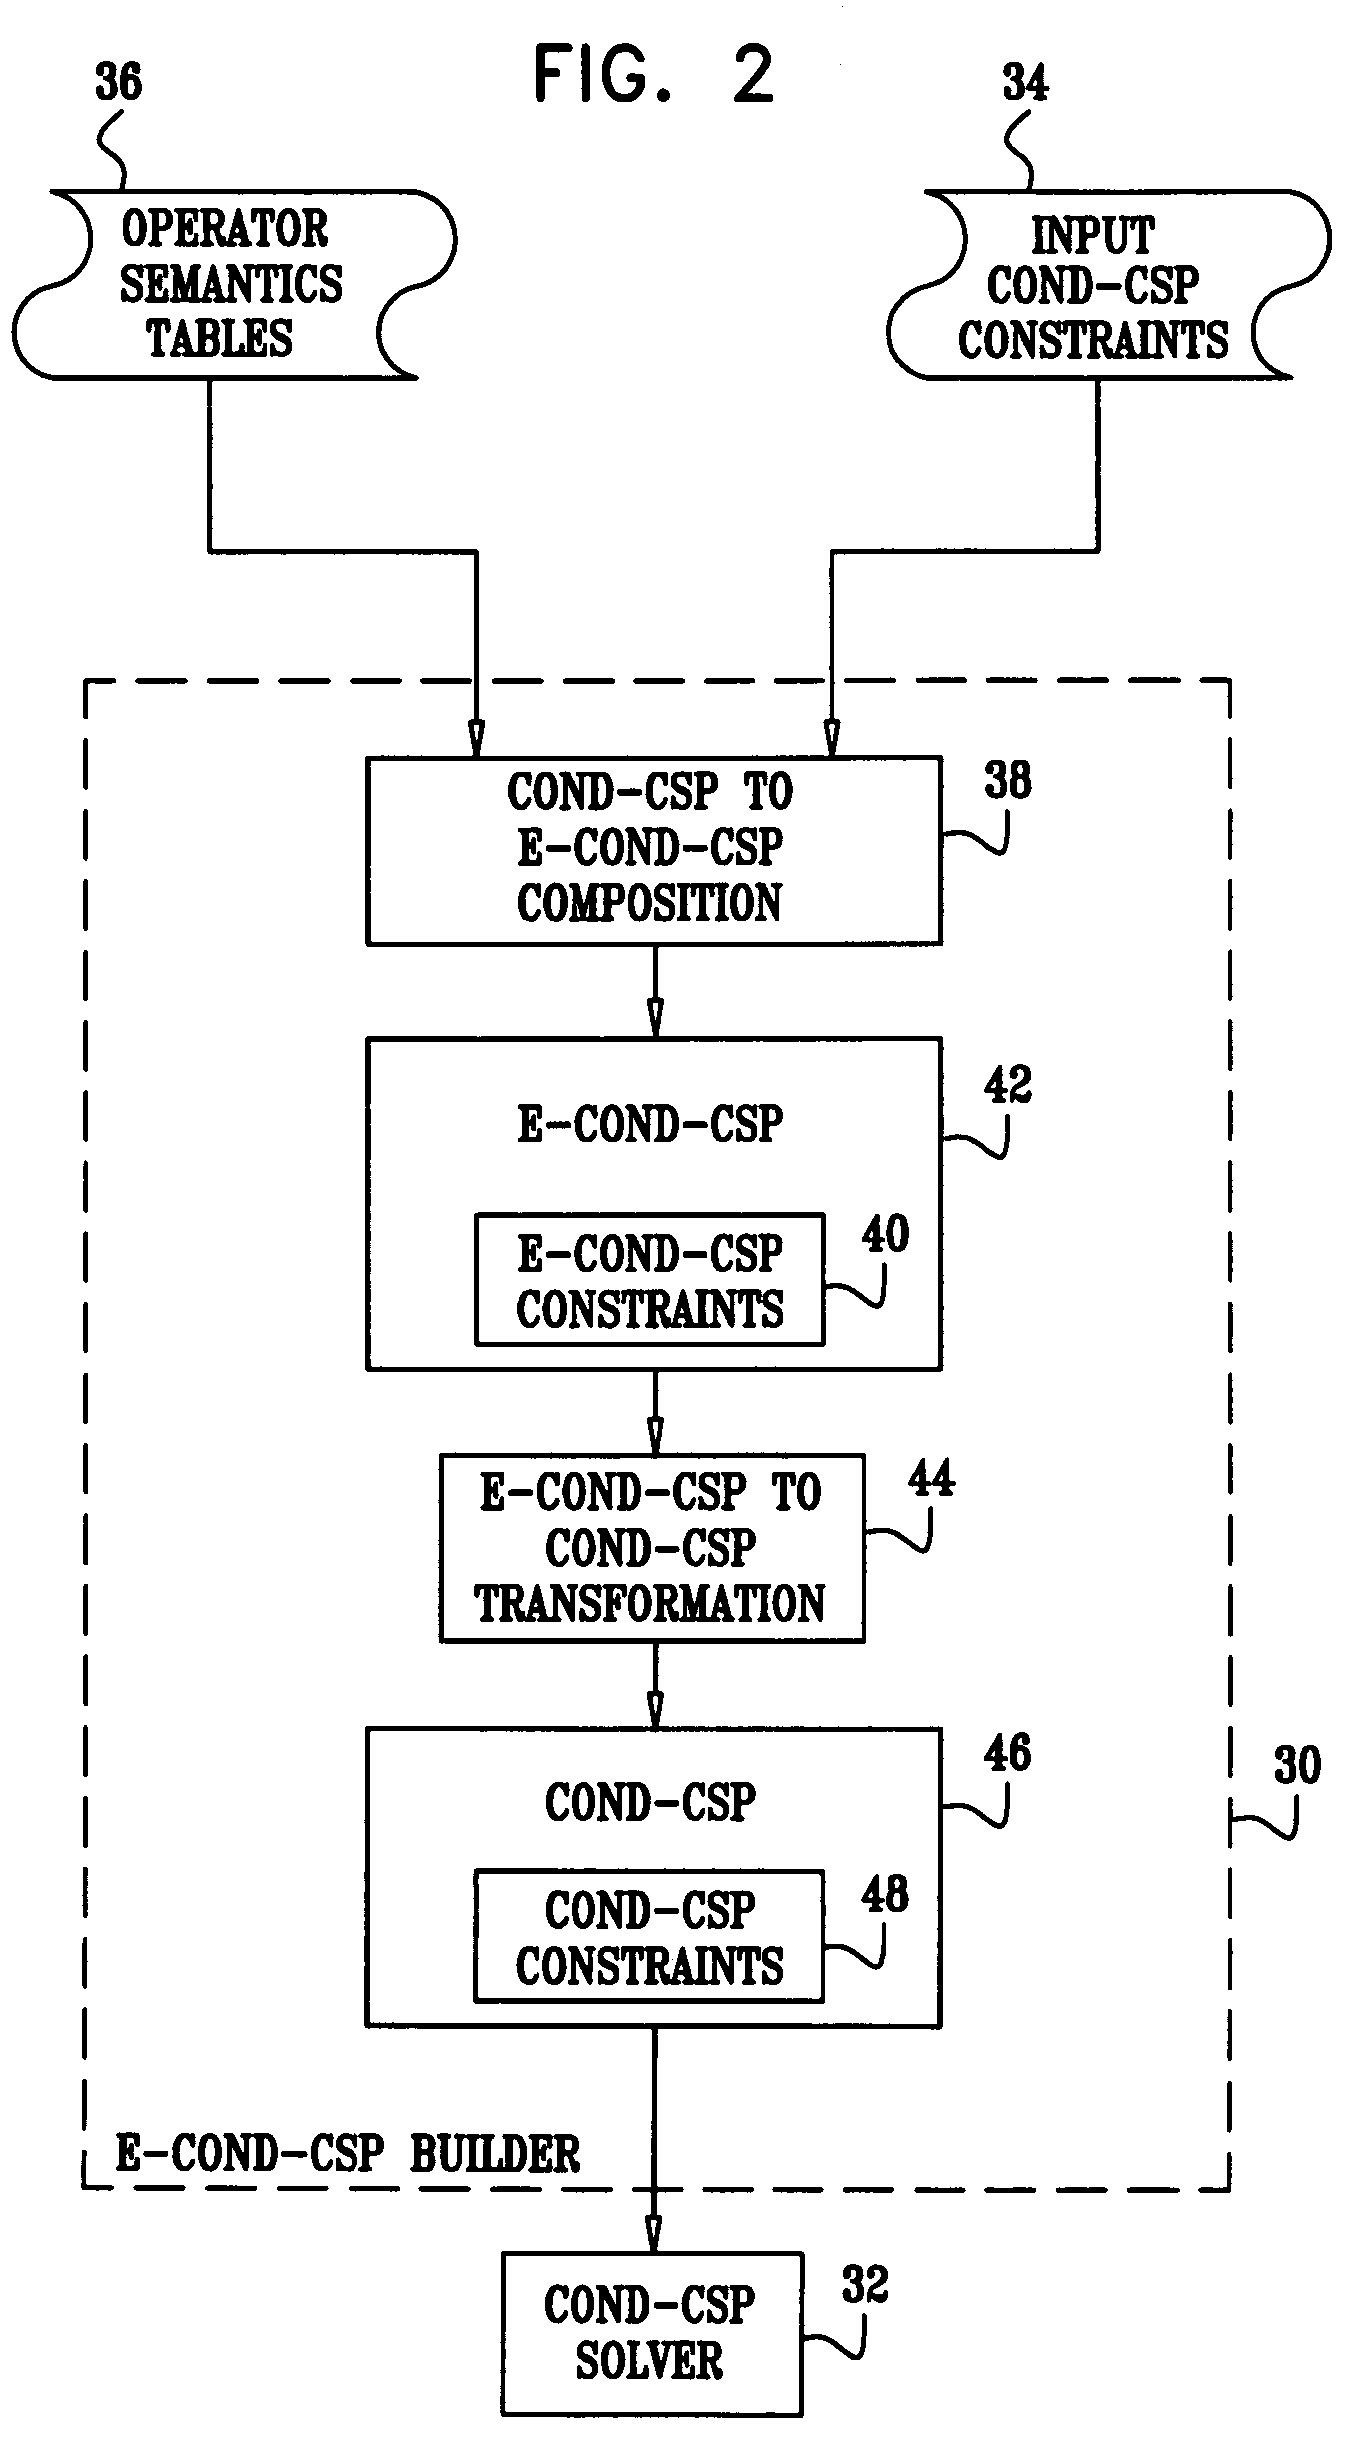 Automatic test program generation using extended conditional constraint satisfaction